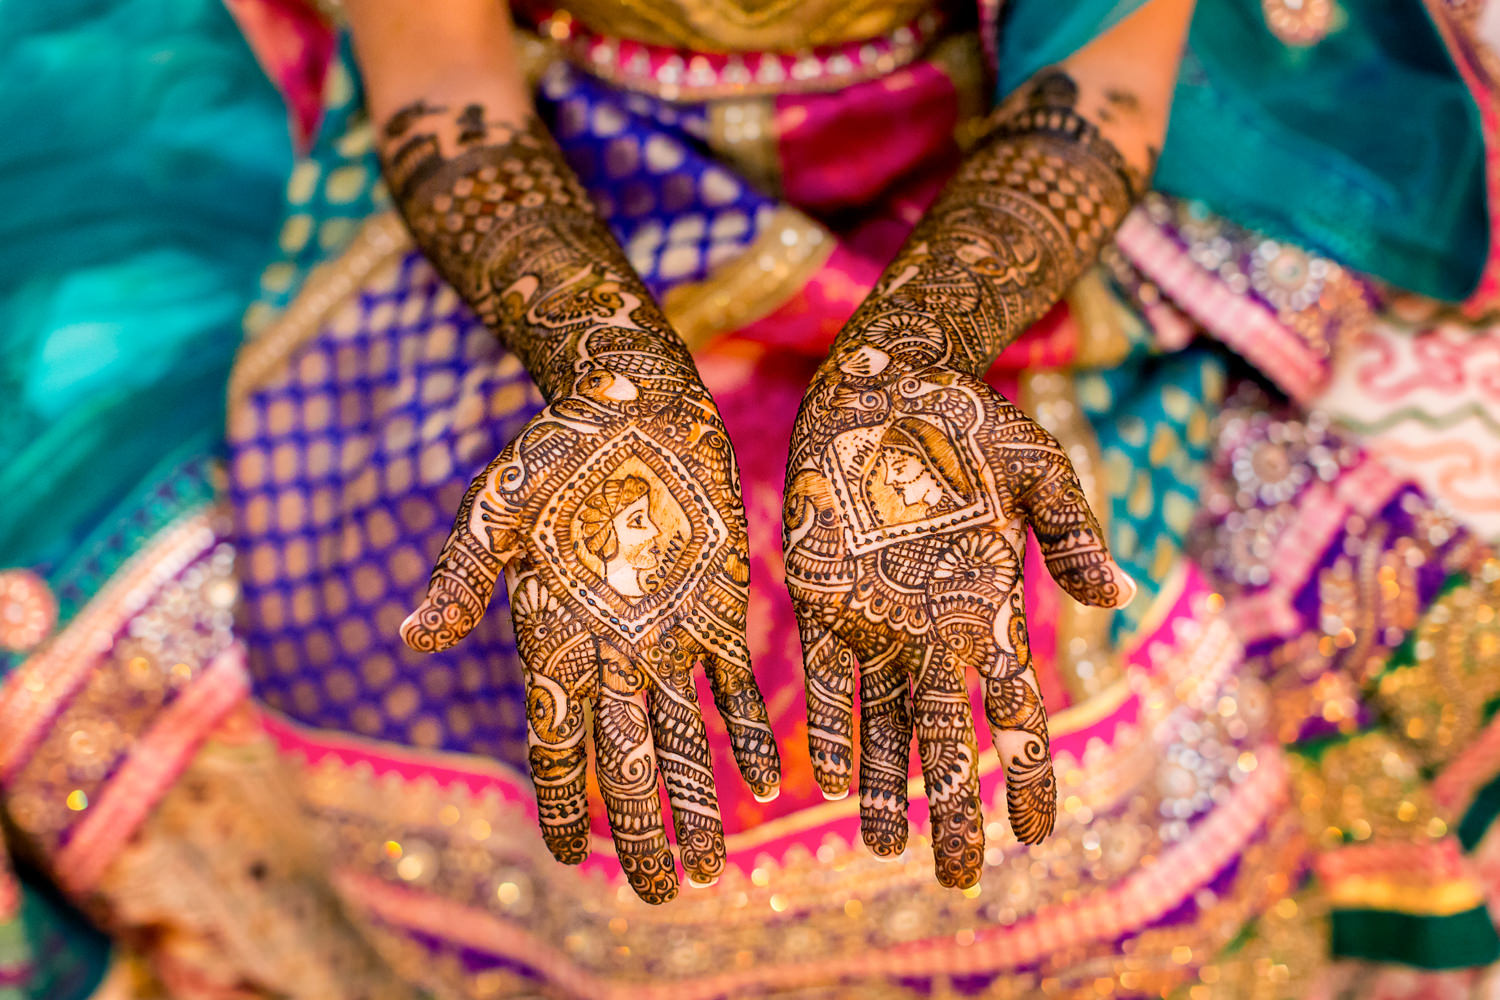 This Indian bride requested cameos of her and her fiancé on her hands, the artwork is so detailed and realistic, she has on a colorful dress and all you see is her hands and her lap, Procopio Photography, best top Washington DC photographer, best top Maryland photographer, best top Virginia photographer, best top DMV photographer, best top wedding photographer, best top commercial photographer, best top portrait photographer, best top boudoir photographer, modern fine art portraits, dramatic, unique, different, bold, editorial, photojournalism, award winning photographer, published photographer, memorable images, be different, stand out